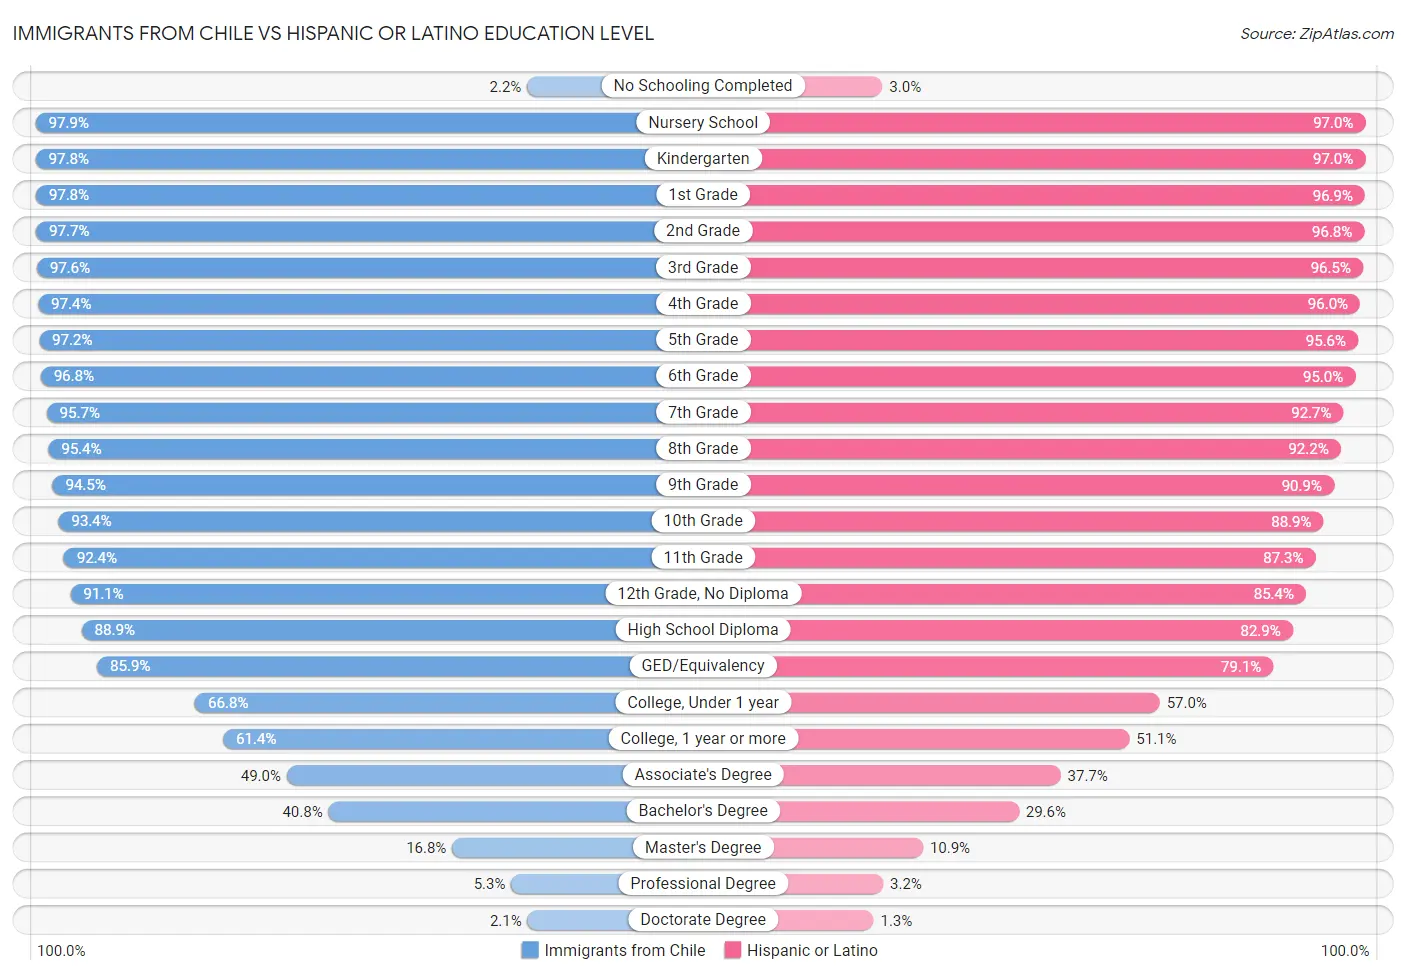 Immigrants from Chile vs Hispanic or Latino Education Level